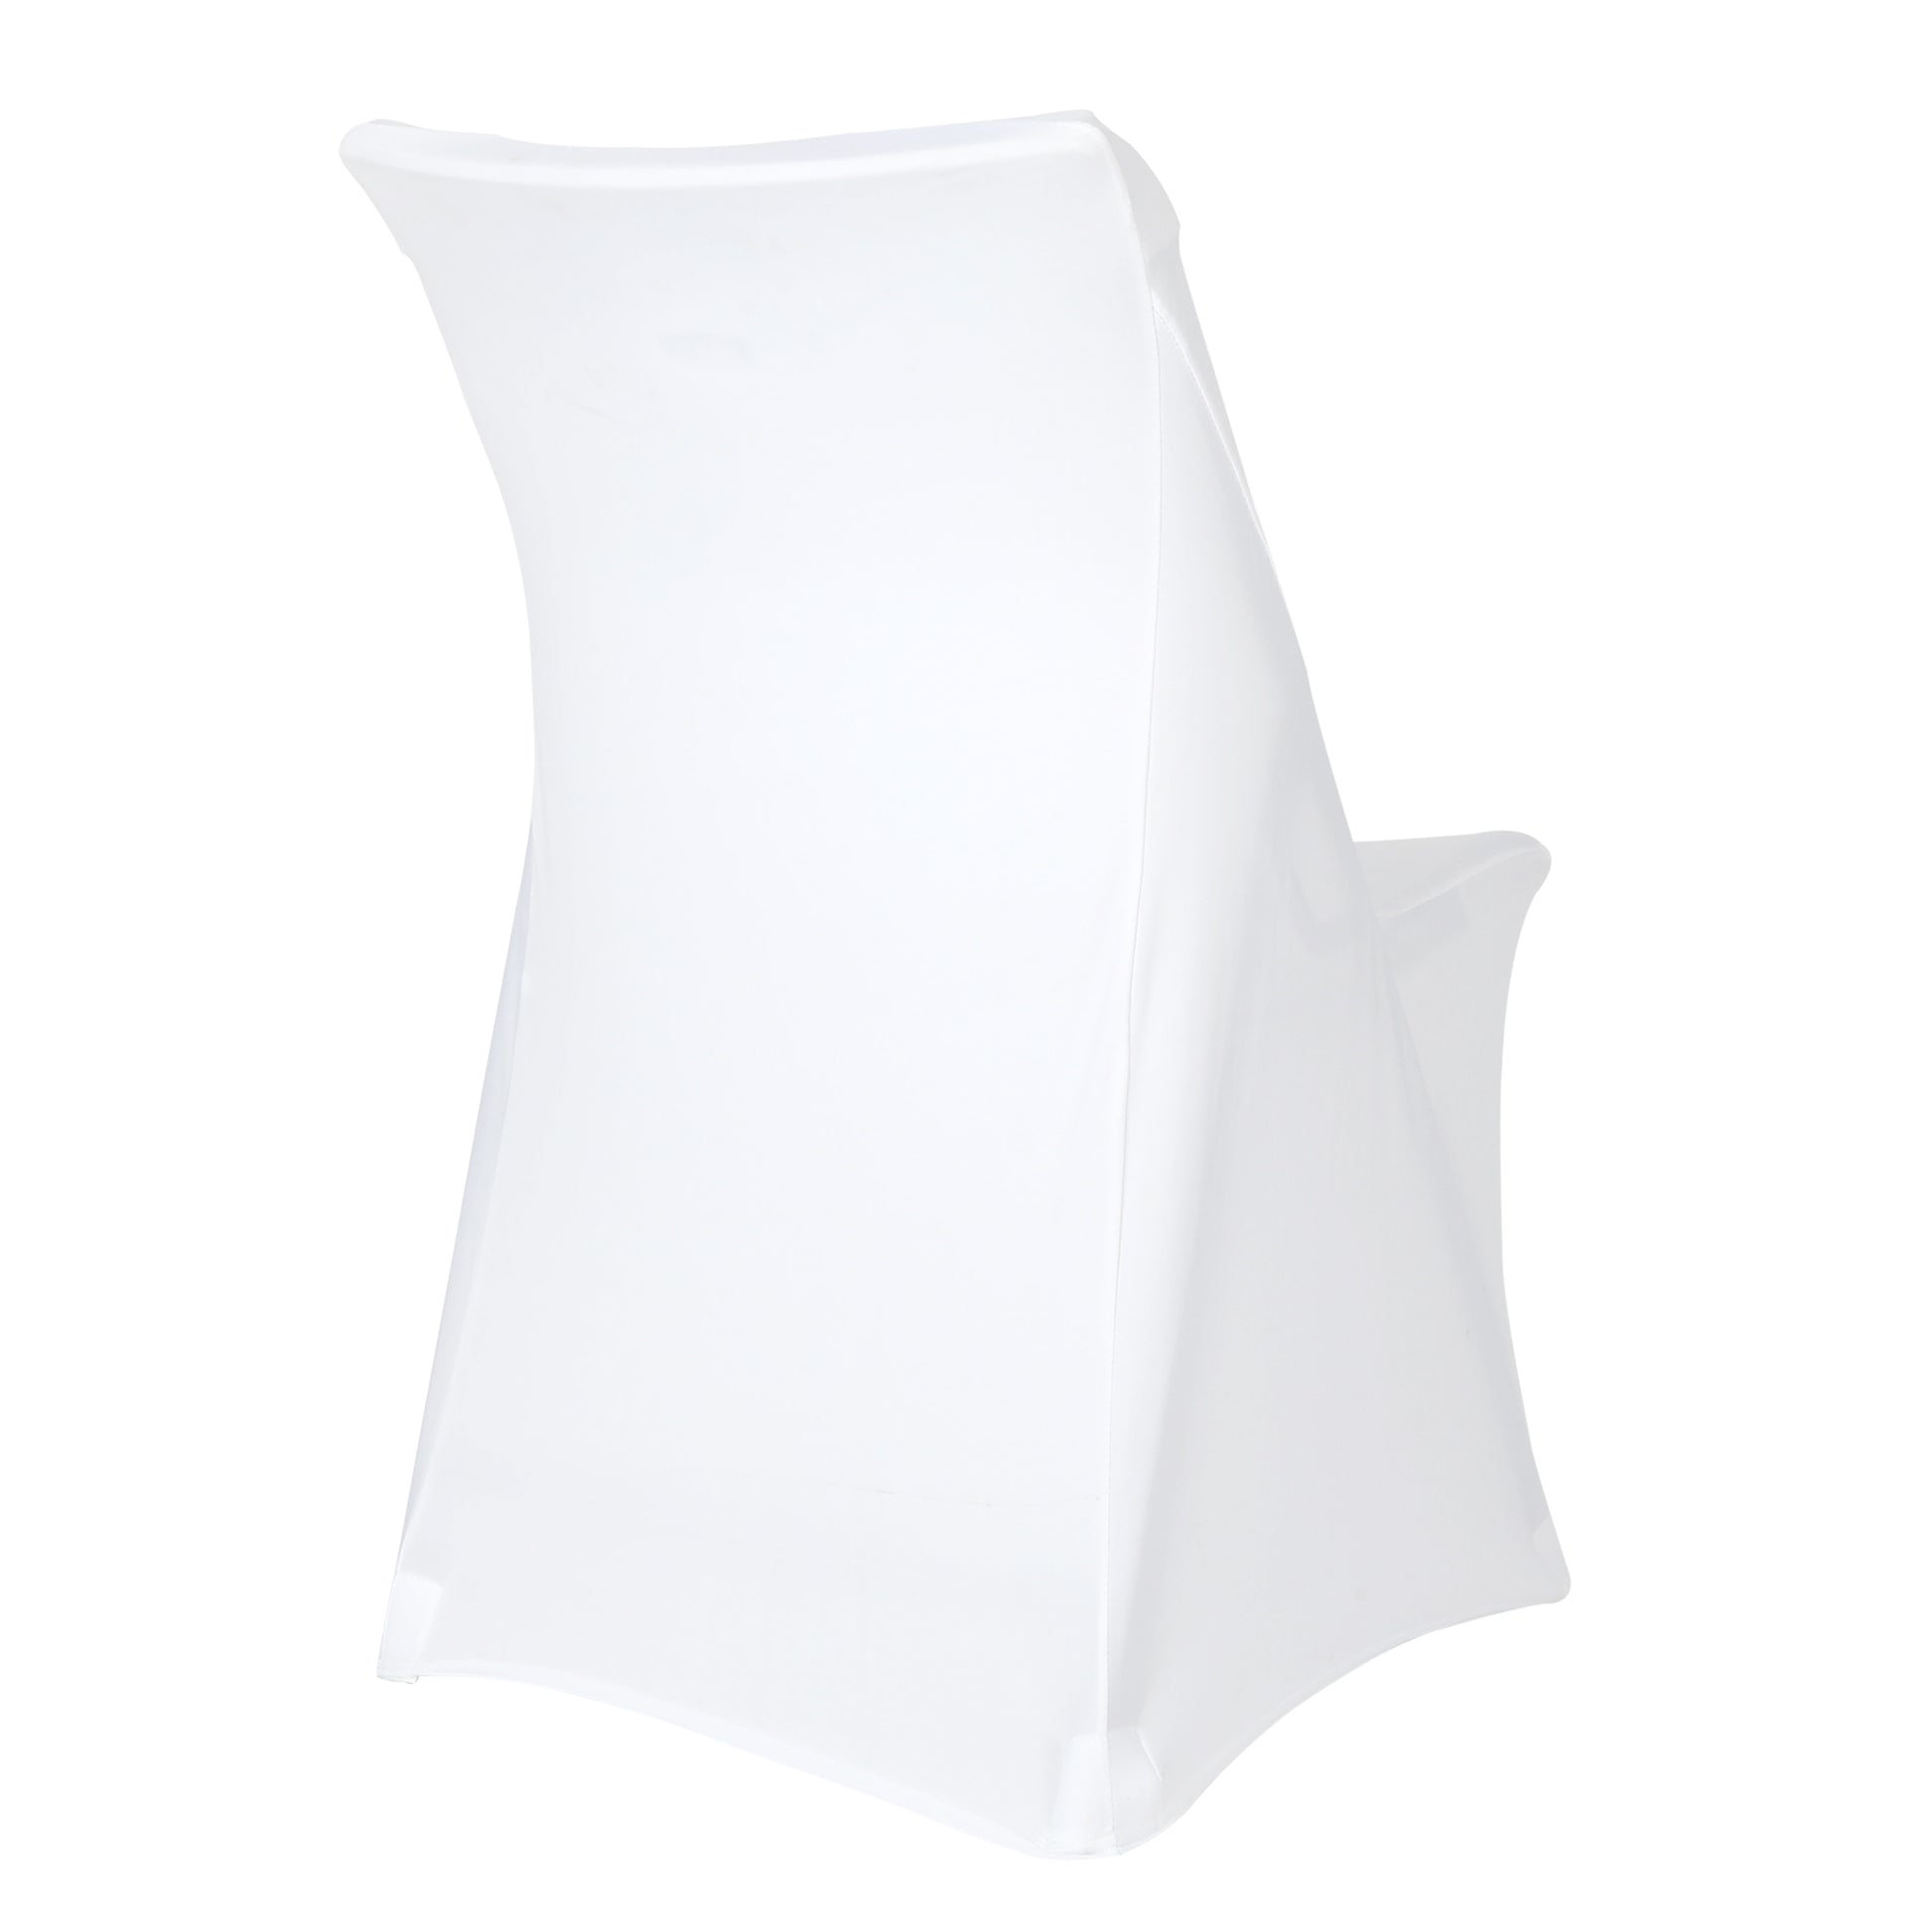 Contemporary LIFETIME folding chair Cover - White at CV Linens